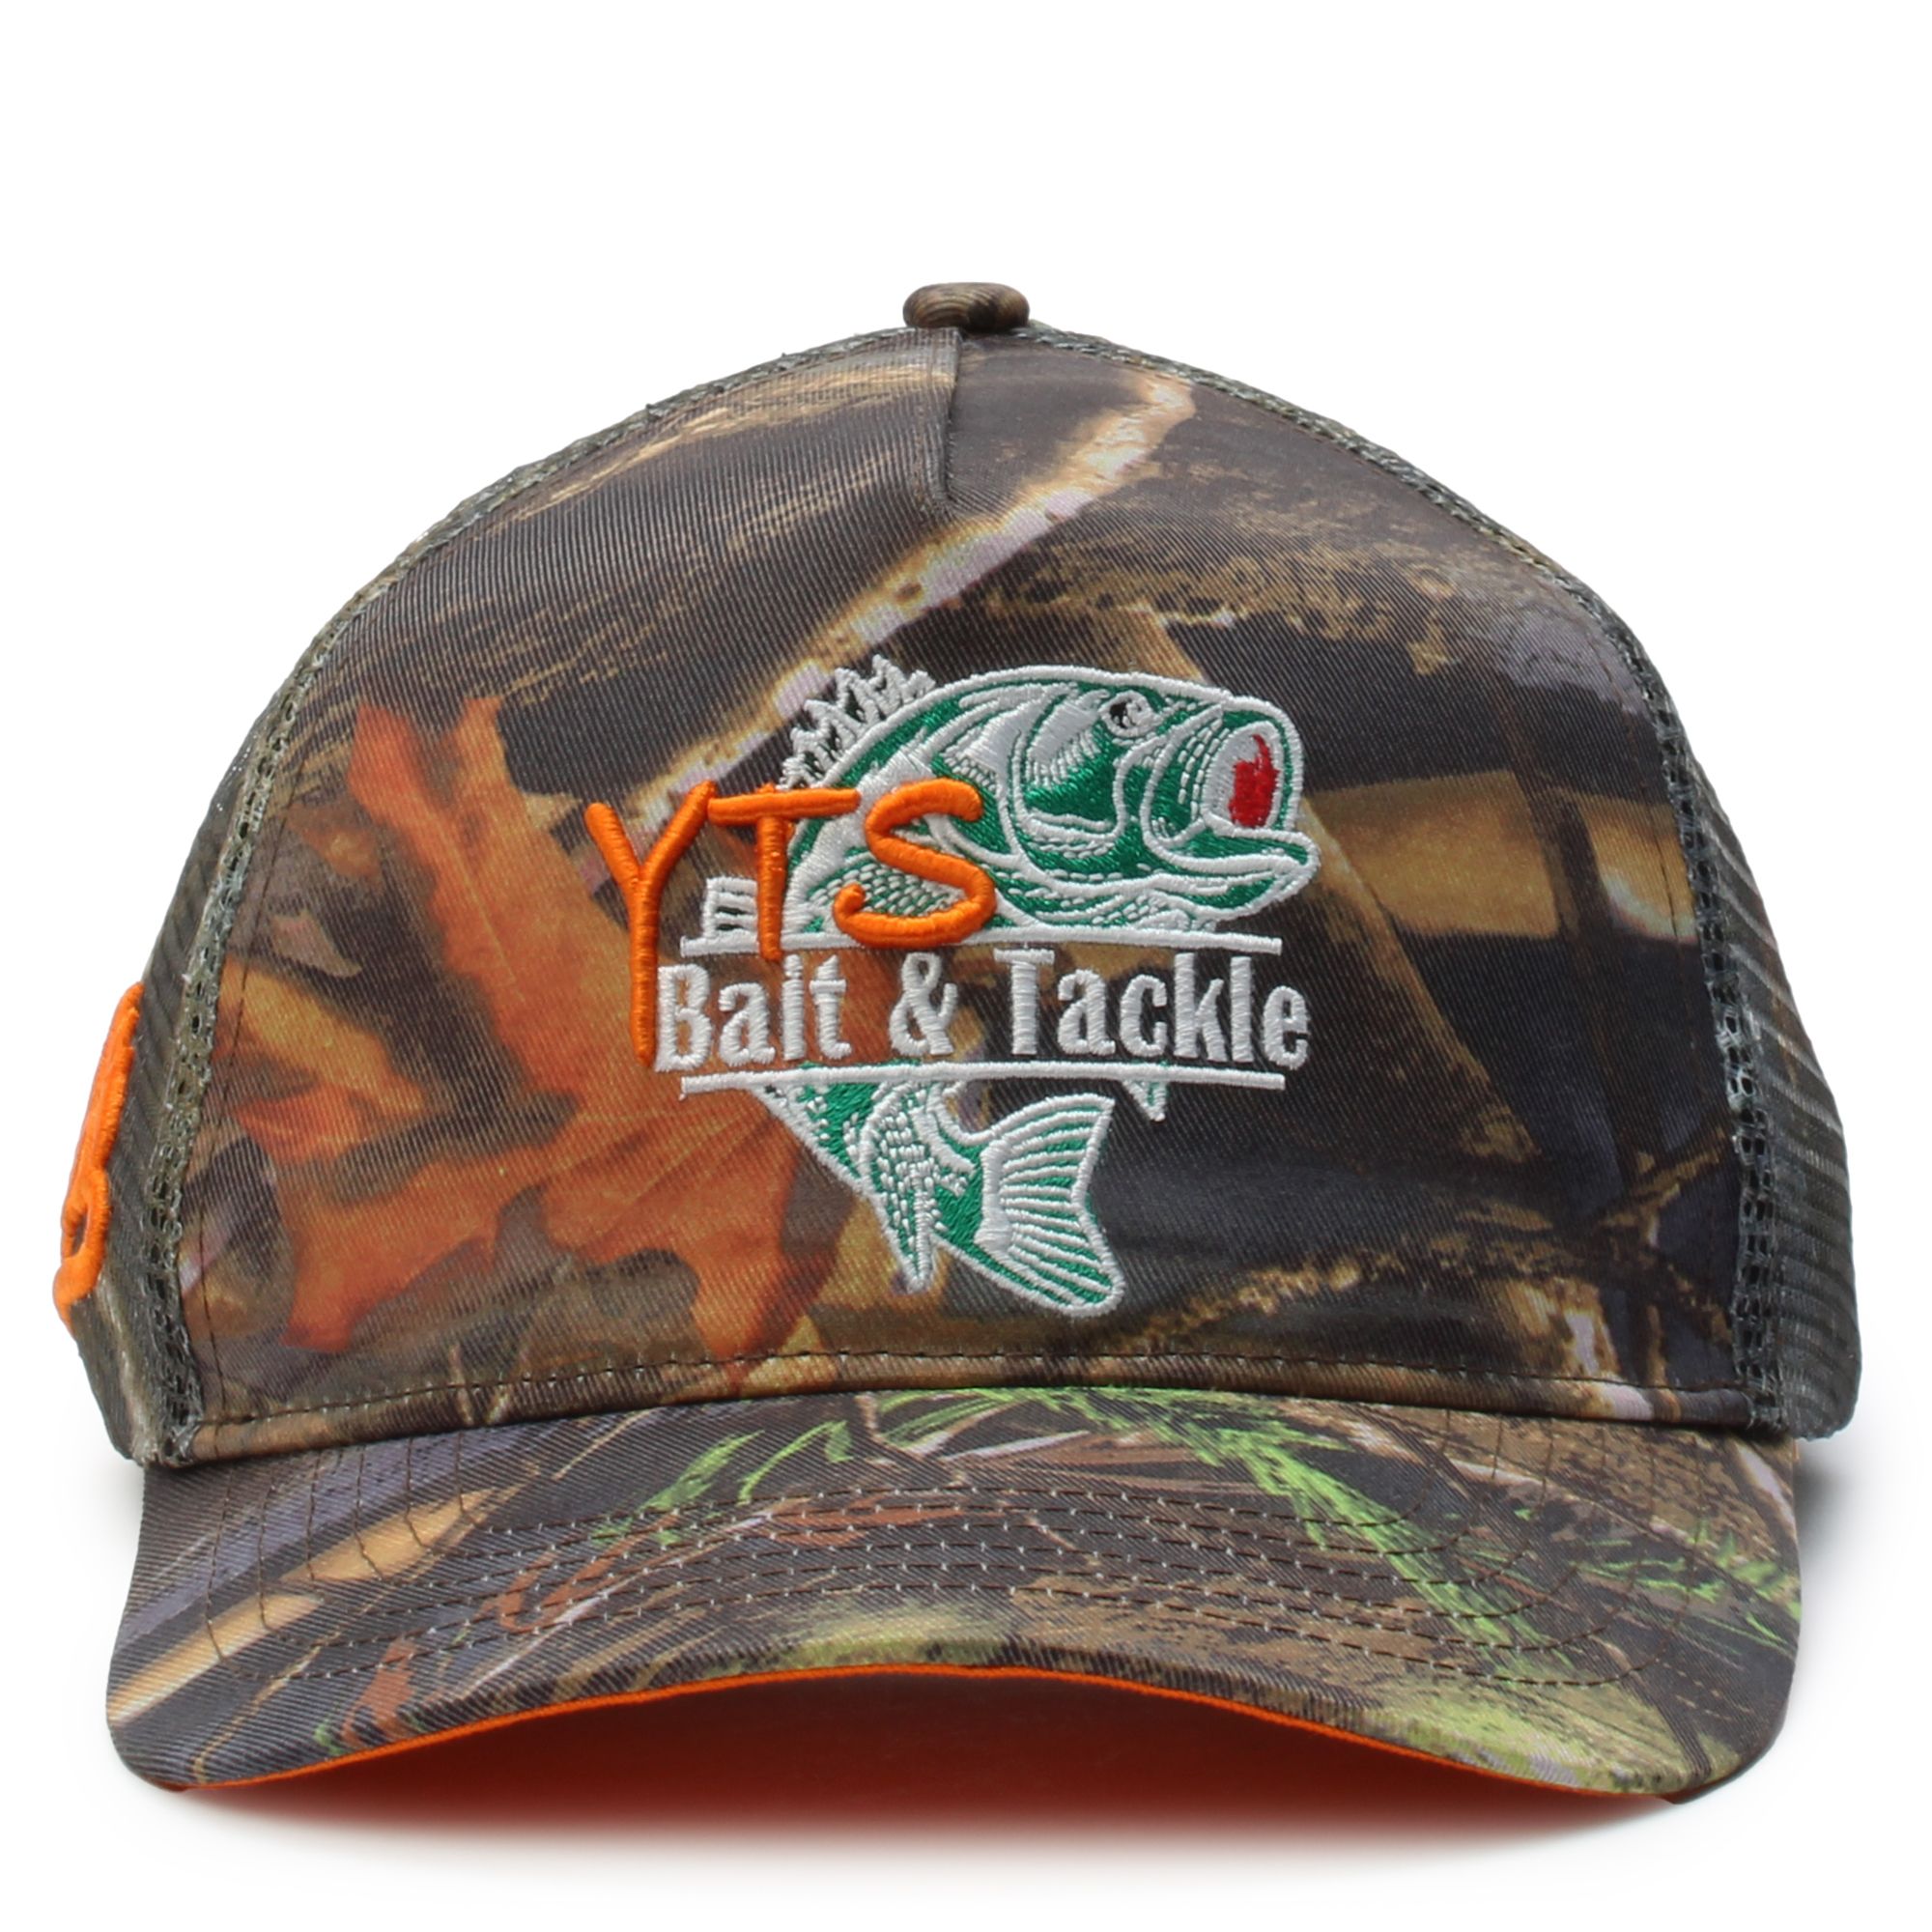 BAIT AND TACKLE TRUCKER HAT YTS880-CAMO